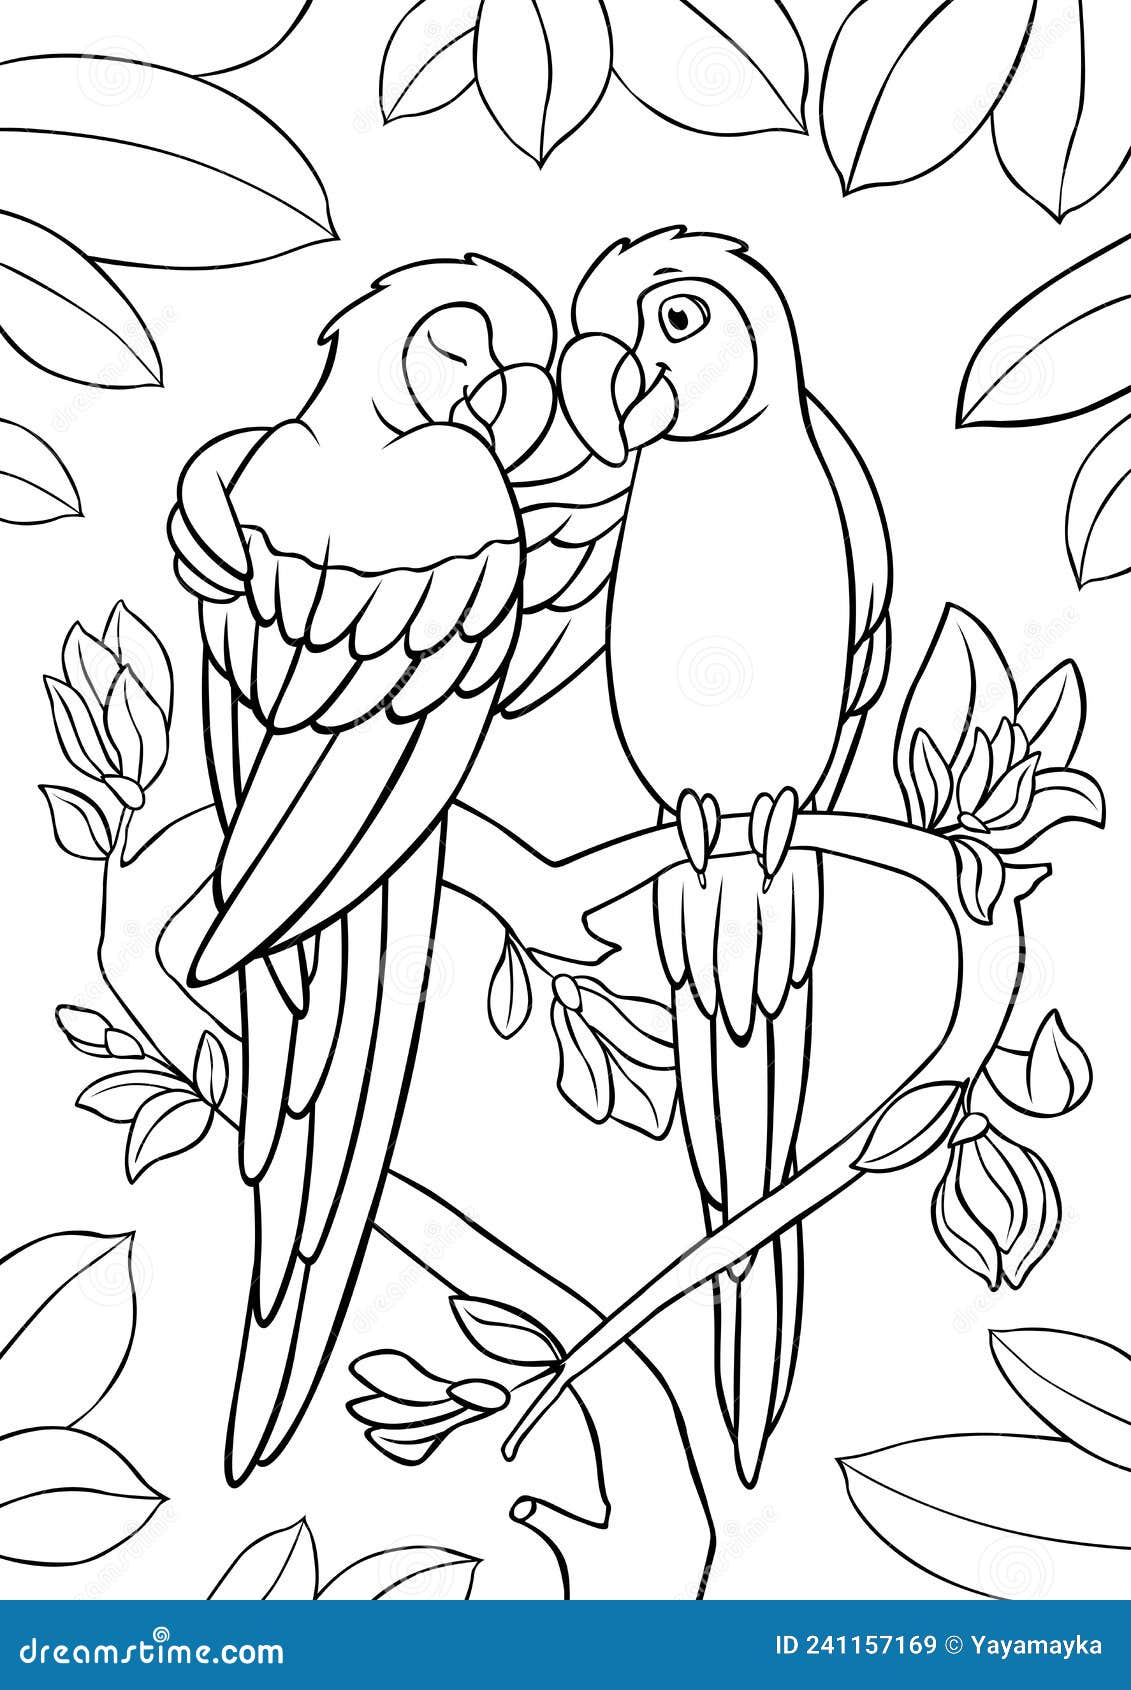 Coloring page two cute parrots red macaw sits and smiles they are in love stock vector